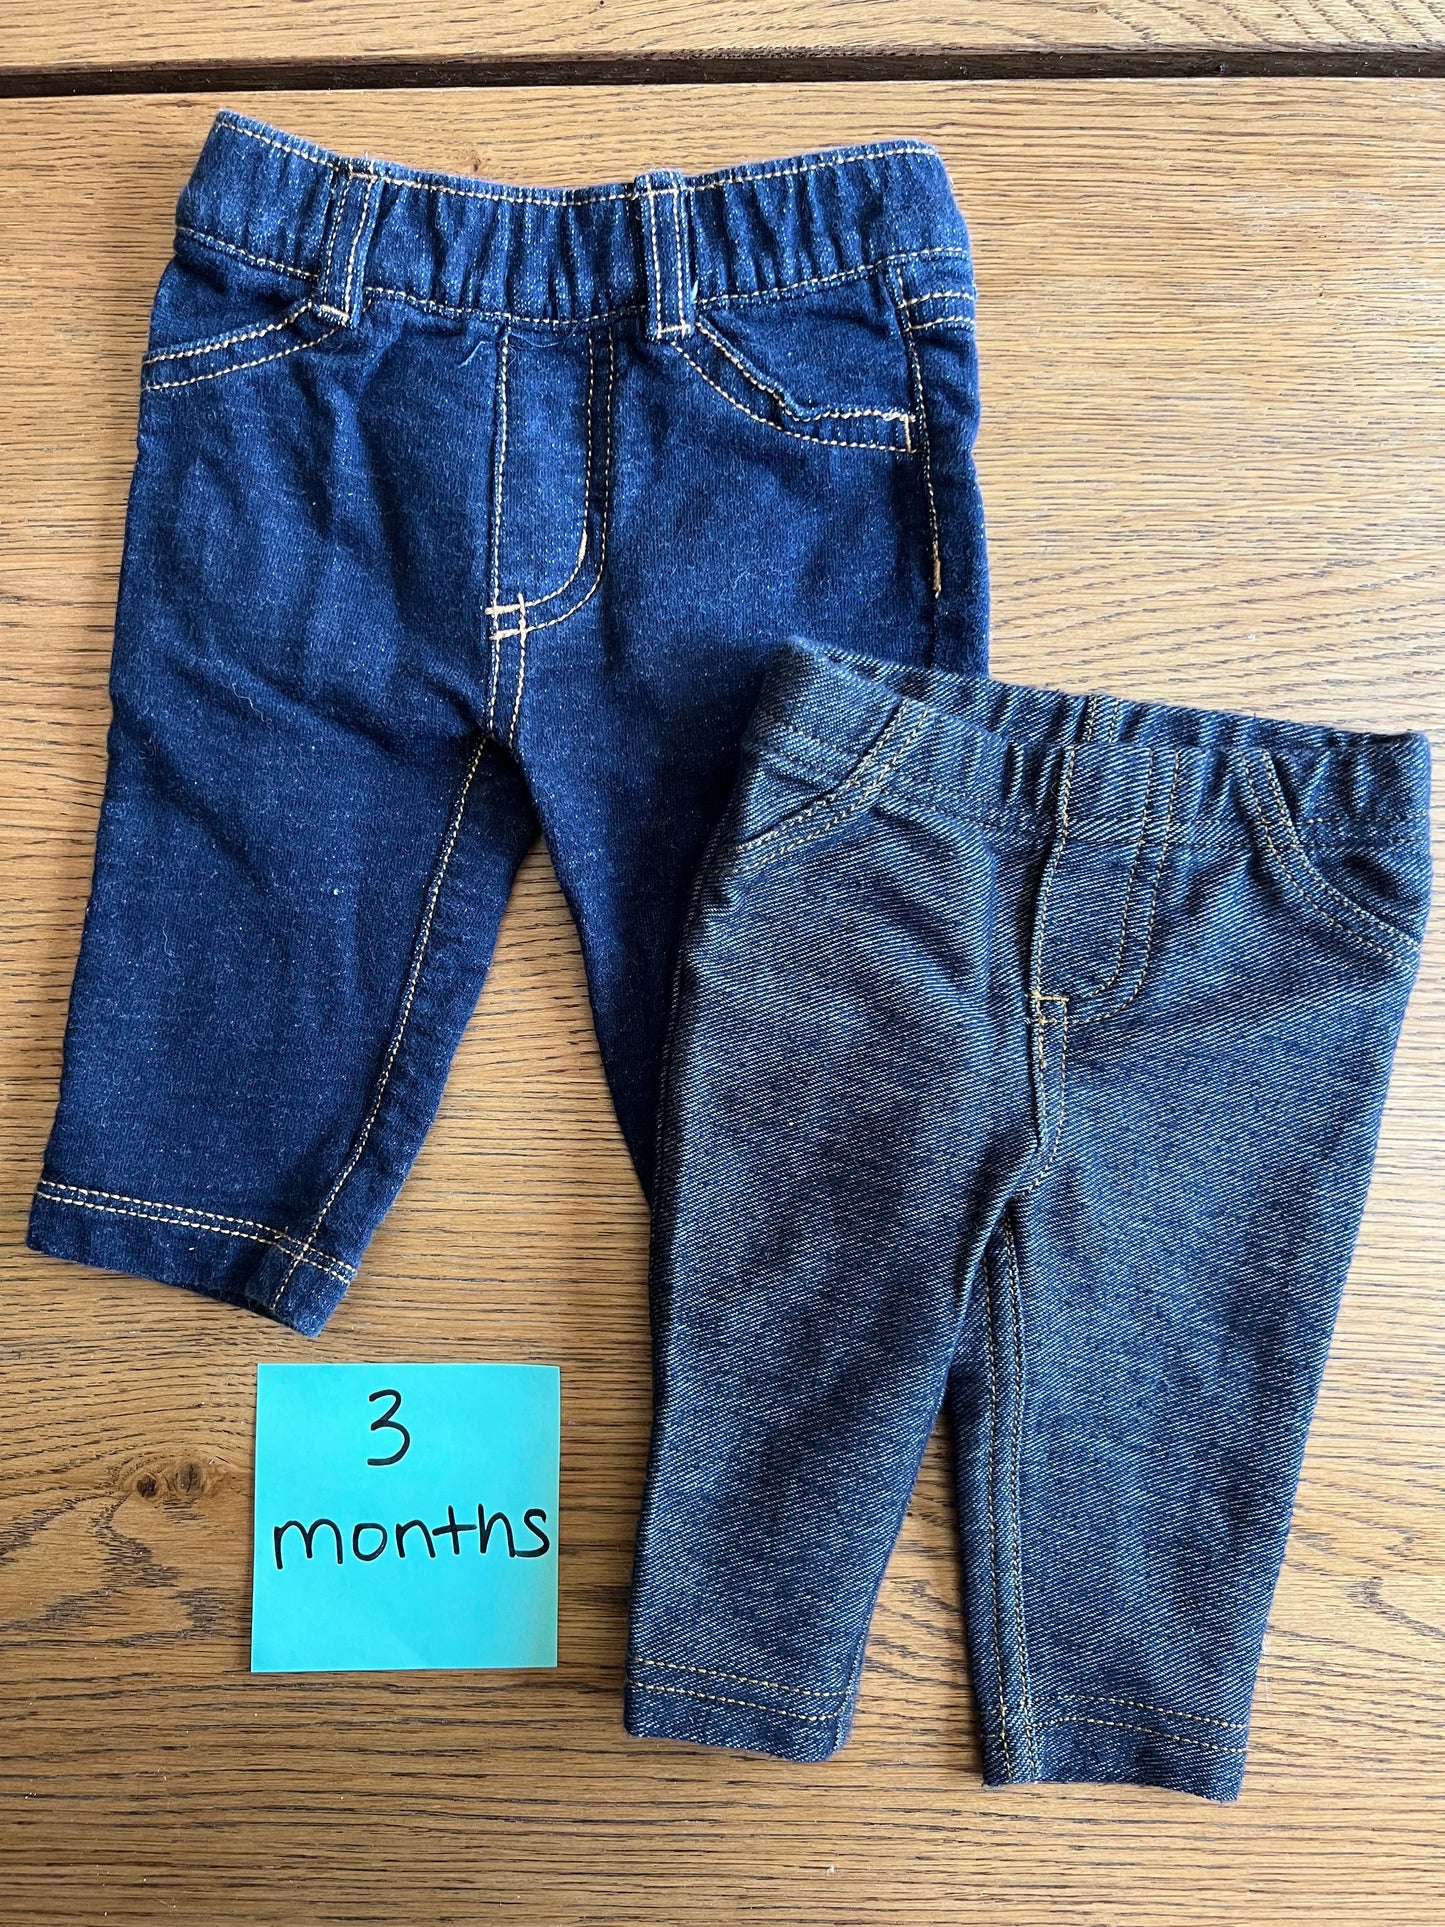 Carter’s baby jeans size 3 months